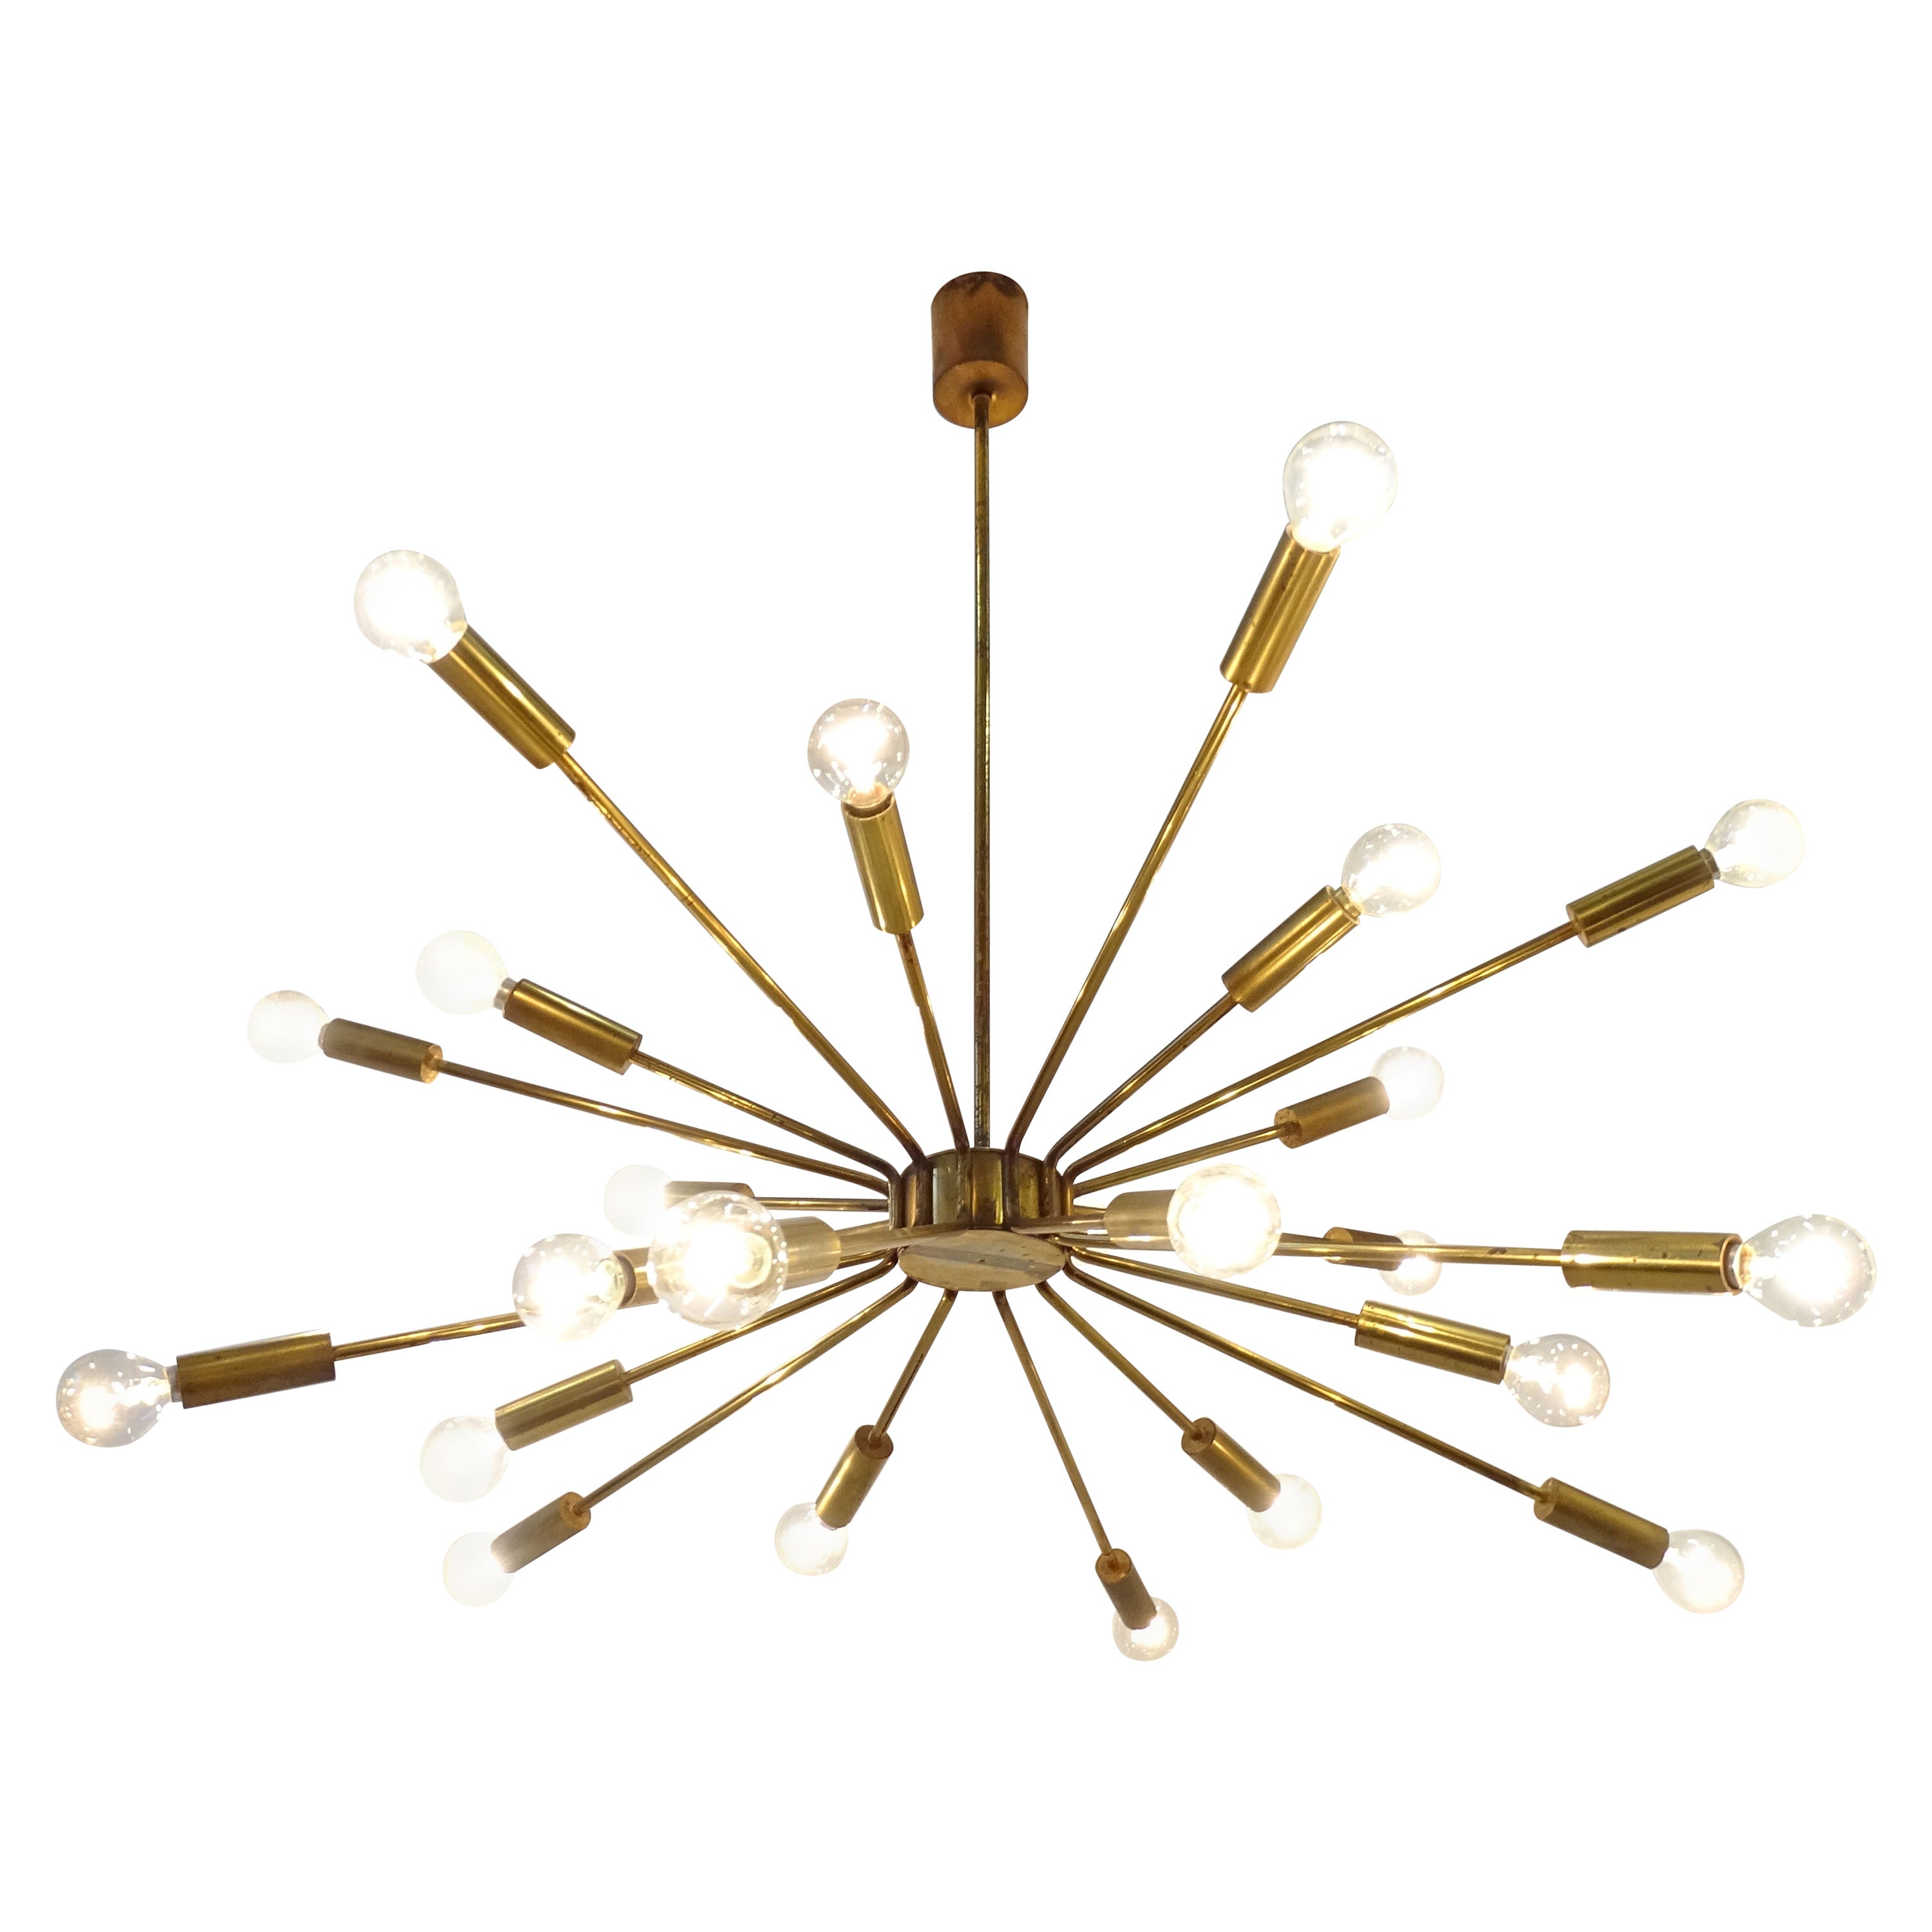 Gino Sarfatti for Arteluce 'Fireworks' Brass Ceiling Lamp, Italy 1939 For Sale